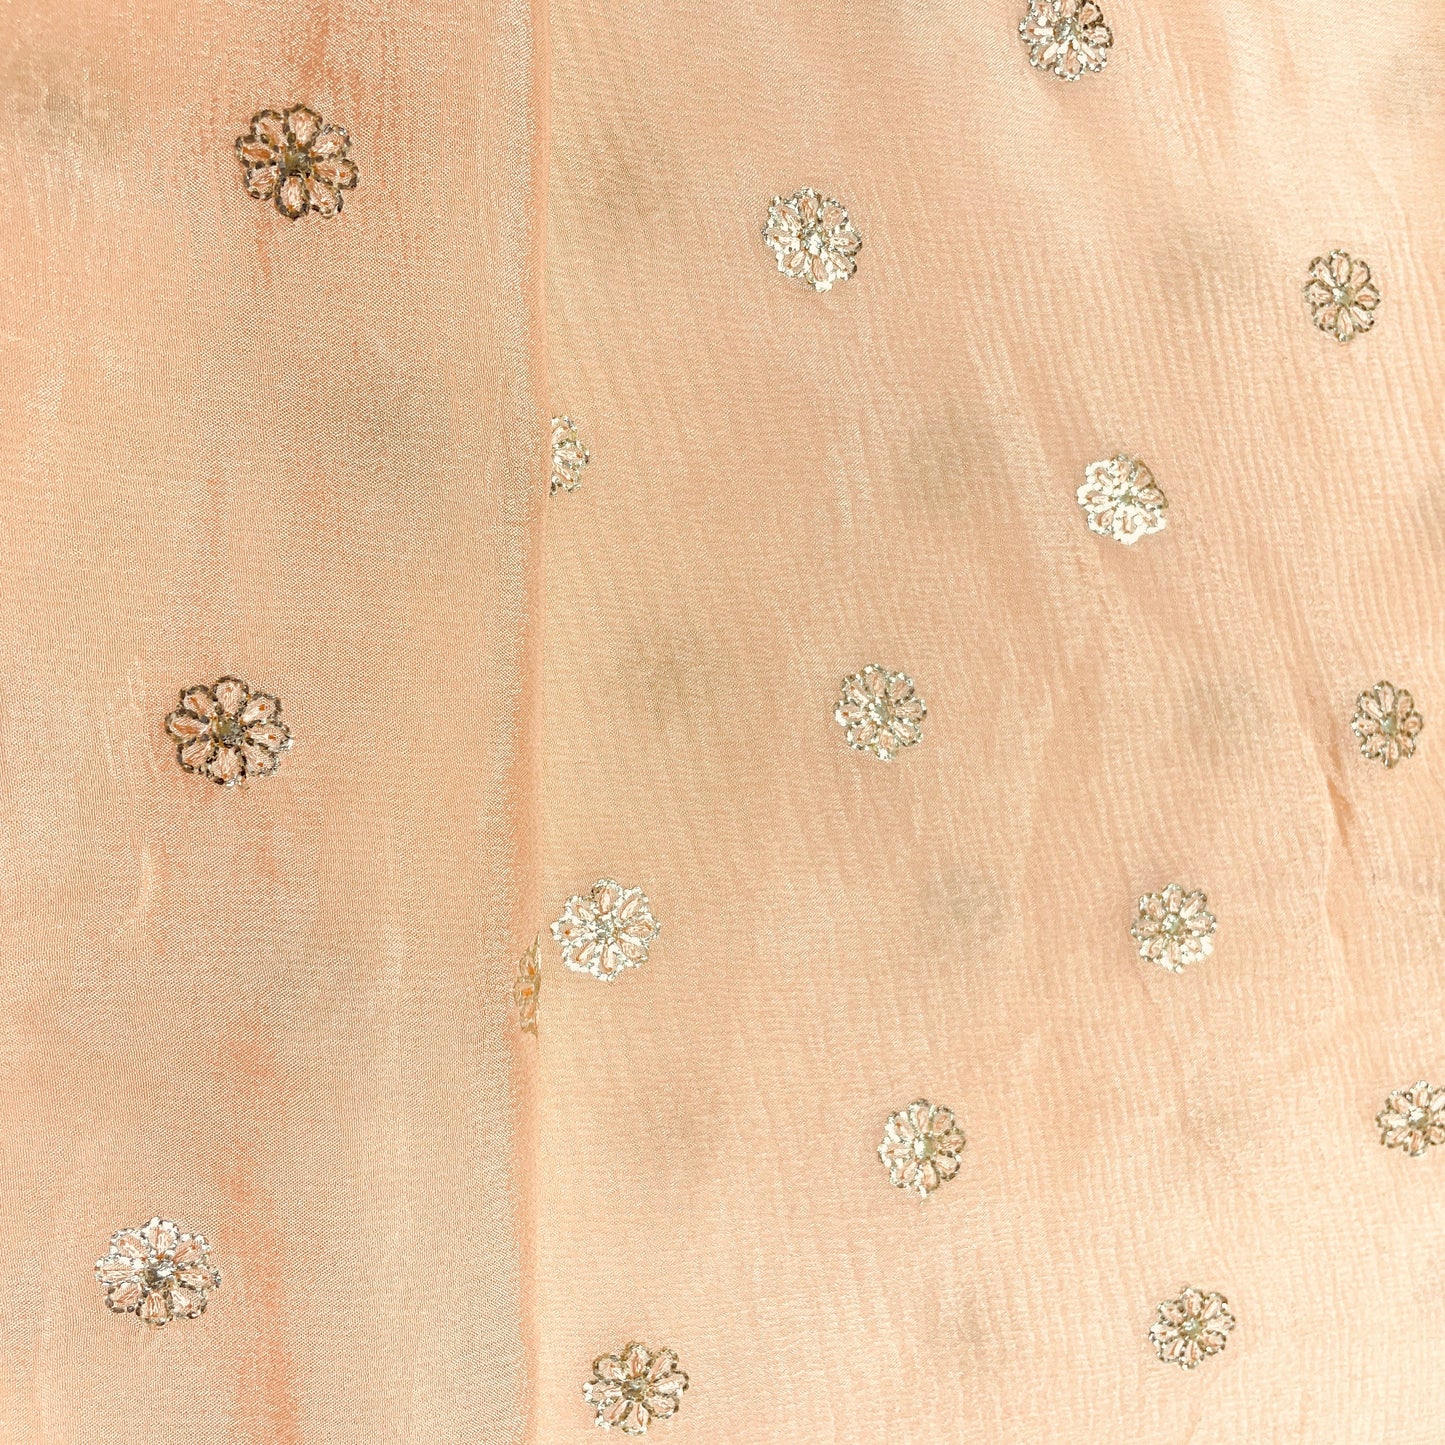 Salmon Pink & Silver Floral Sequence Thread Embroidery Chinnon Fabric - TradeUNO